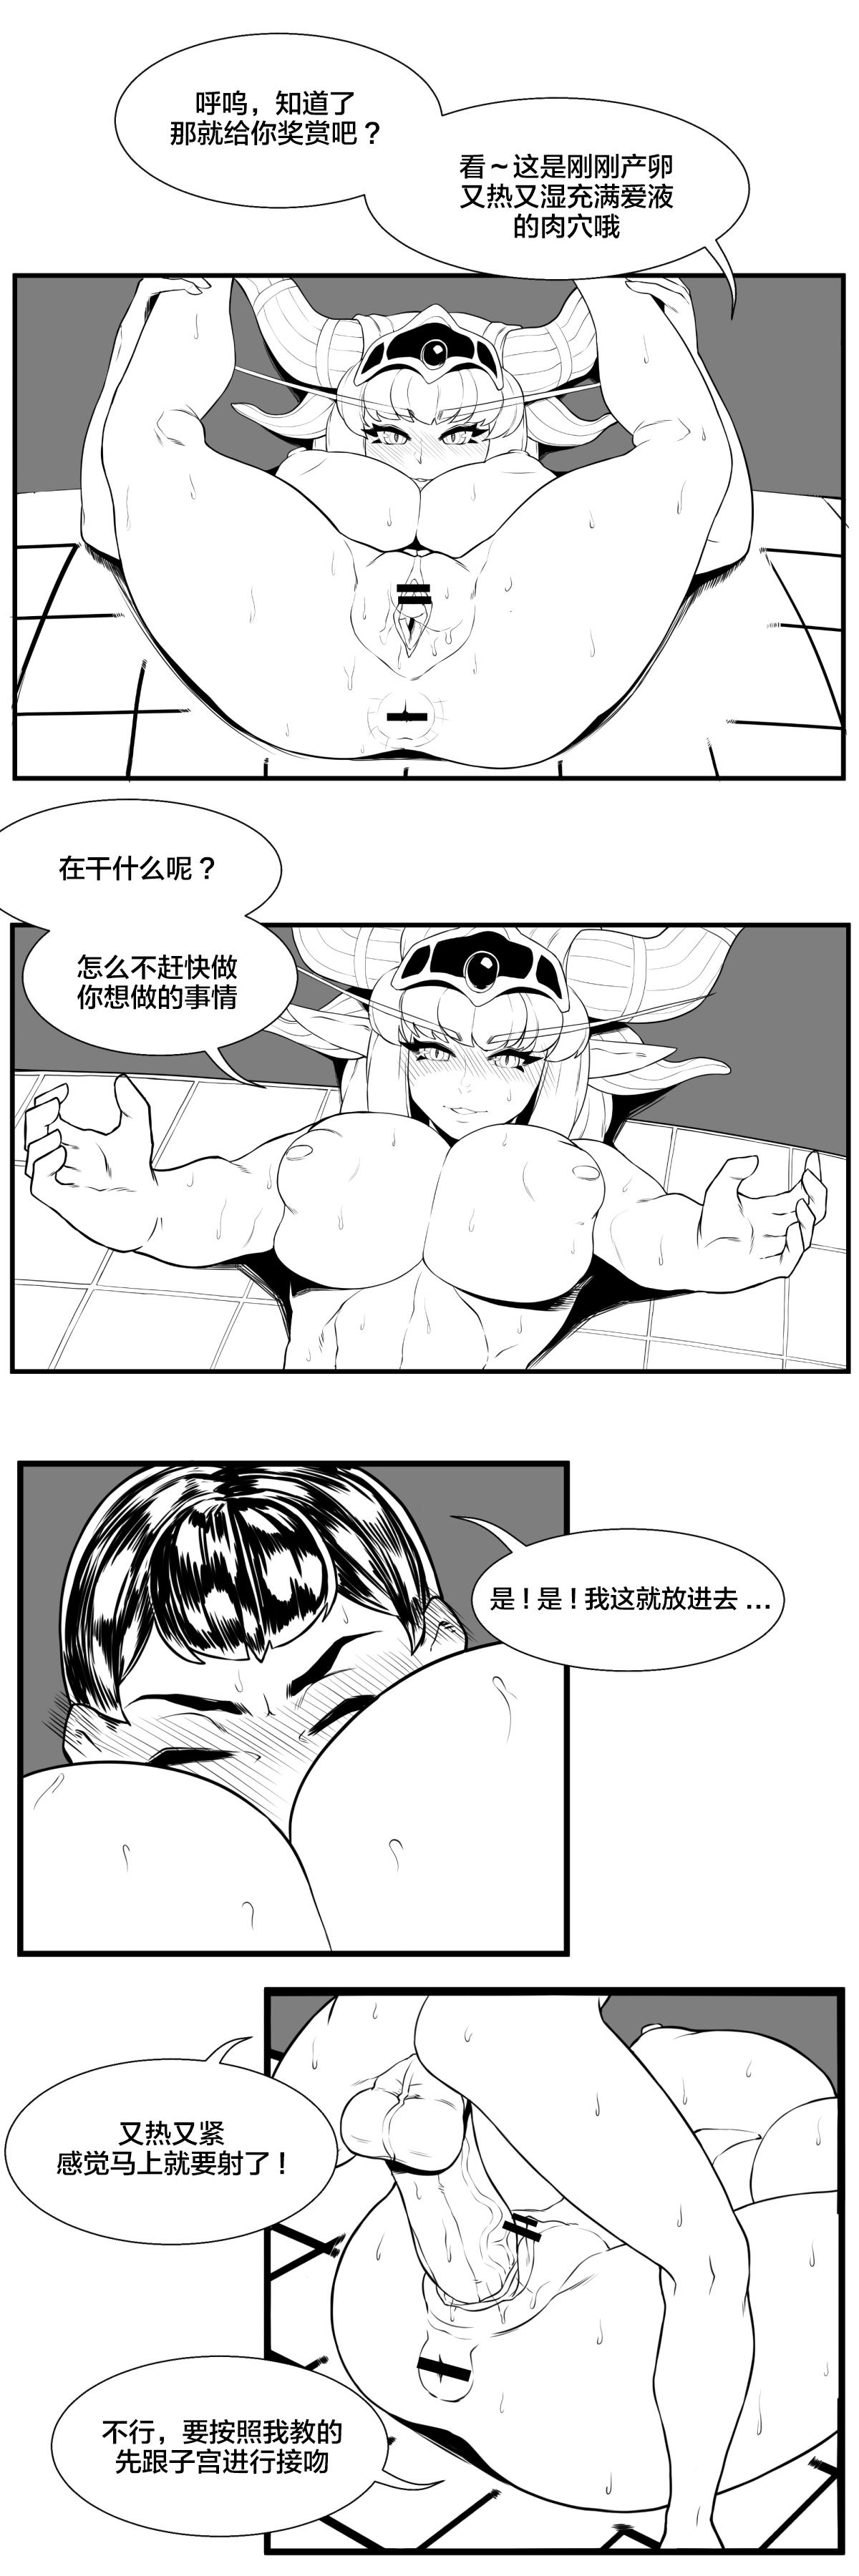 Hotwife 용엄마와 비밀상담 - World of warcraft Fuck For Cash - Page 6